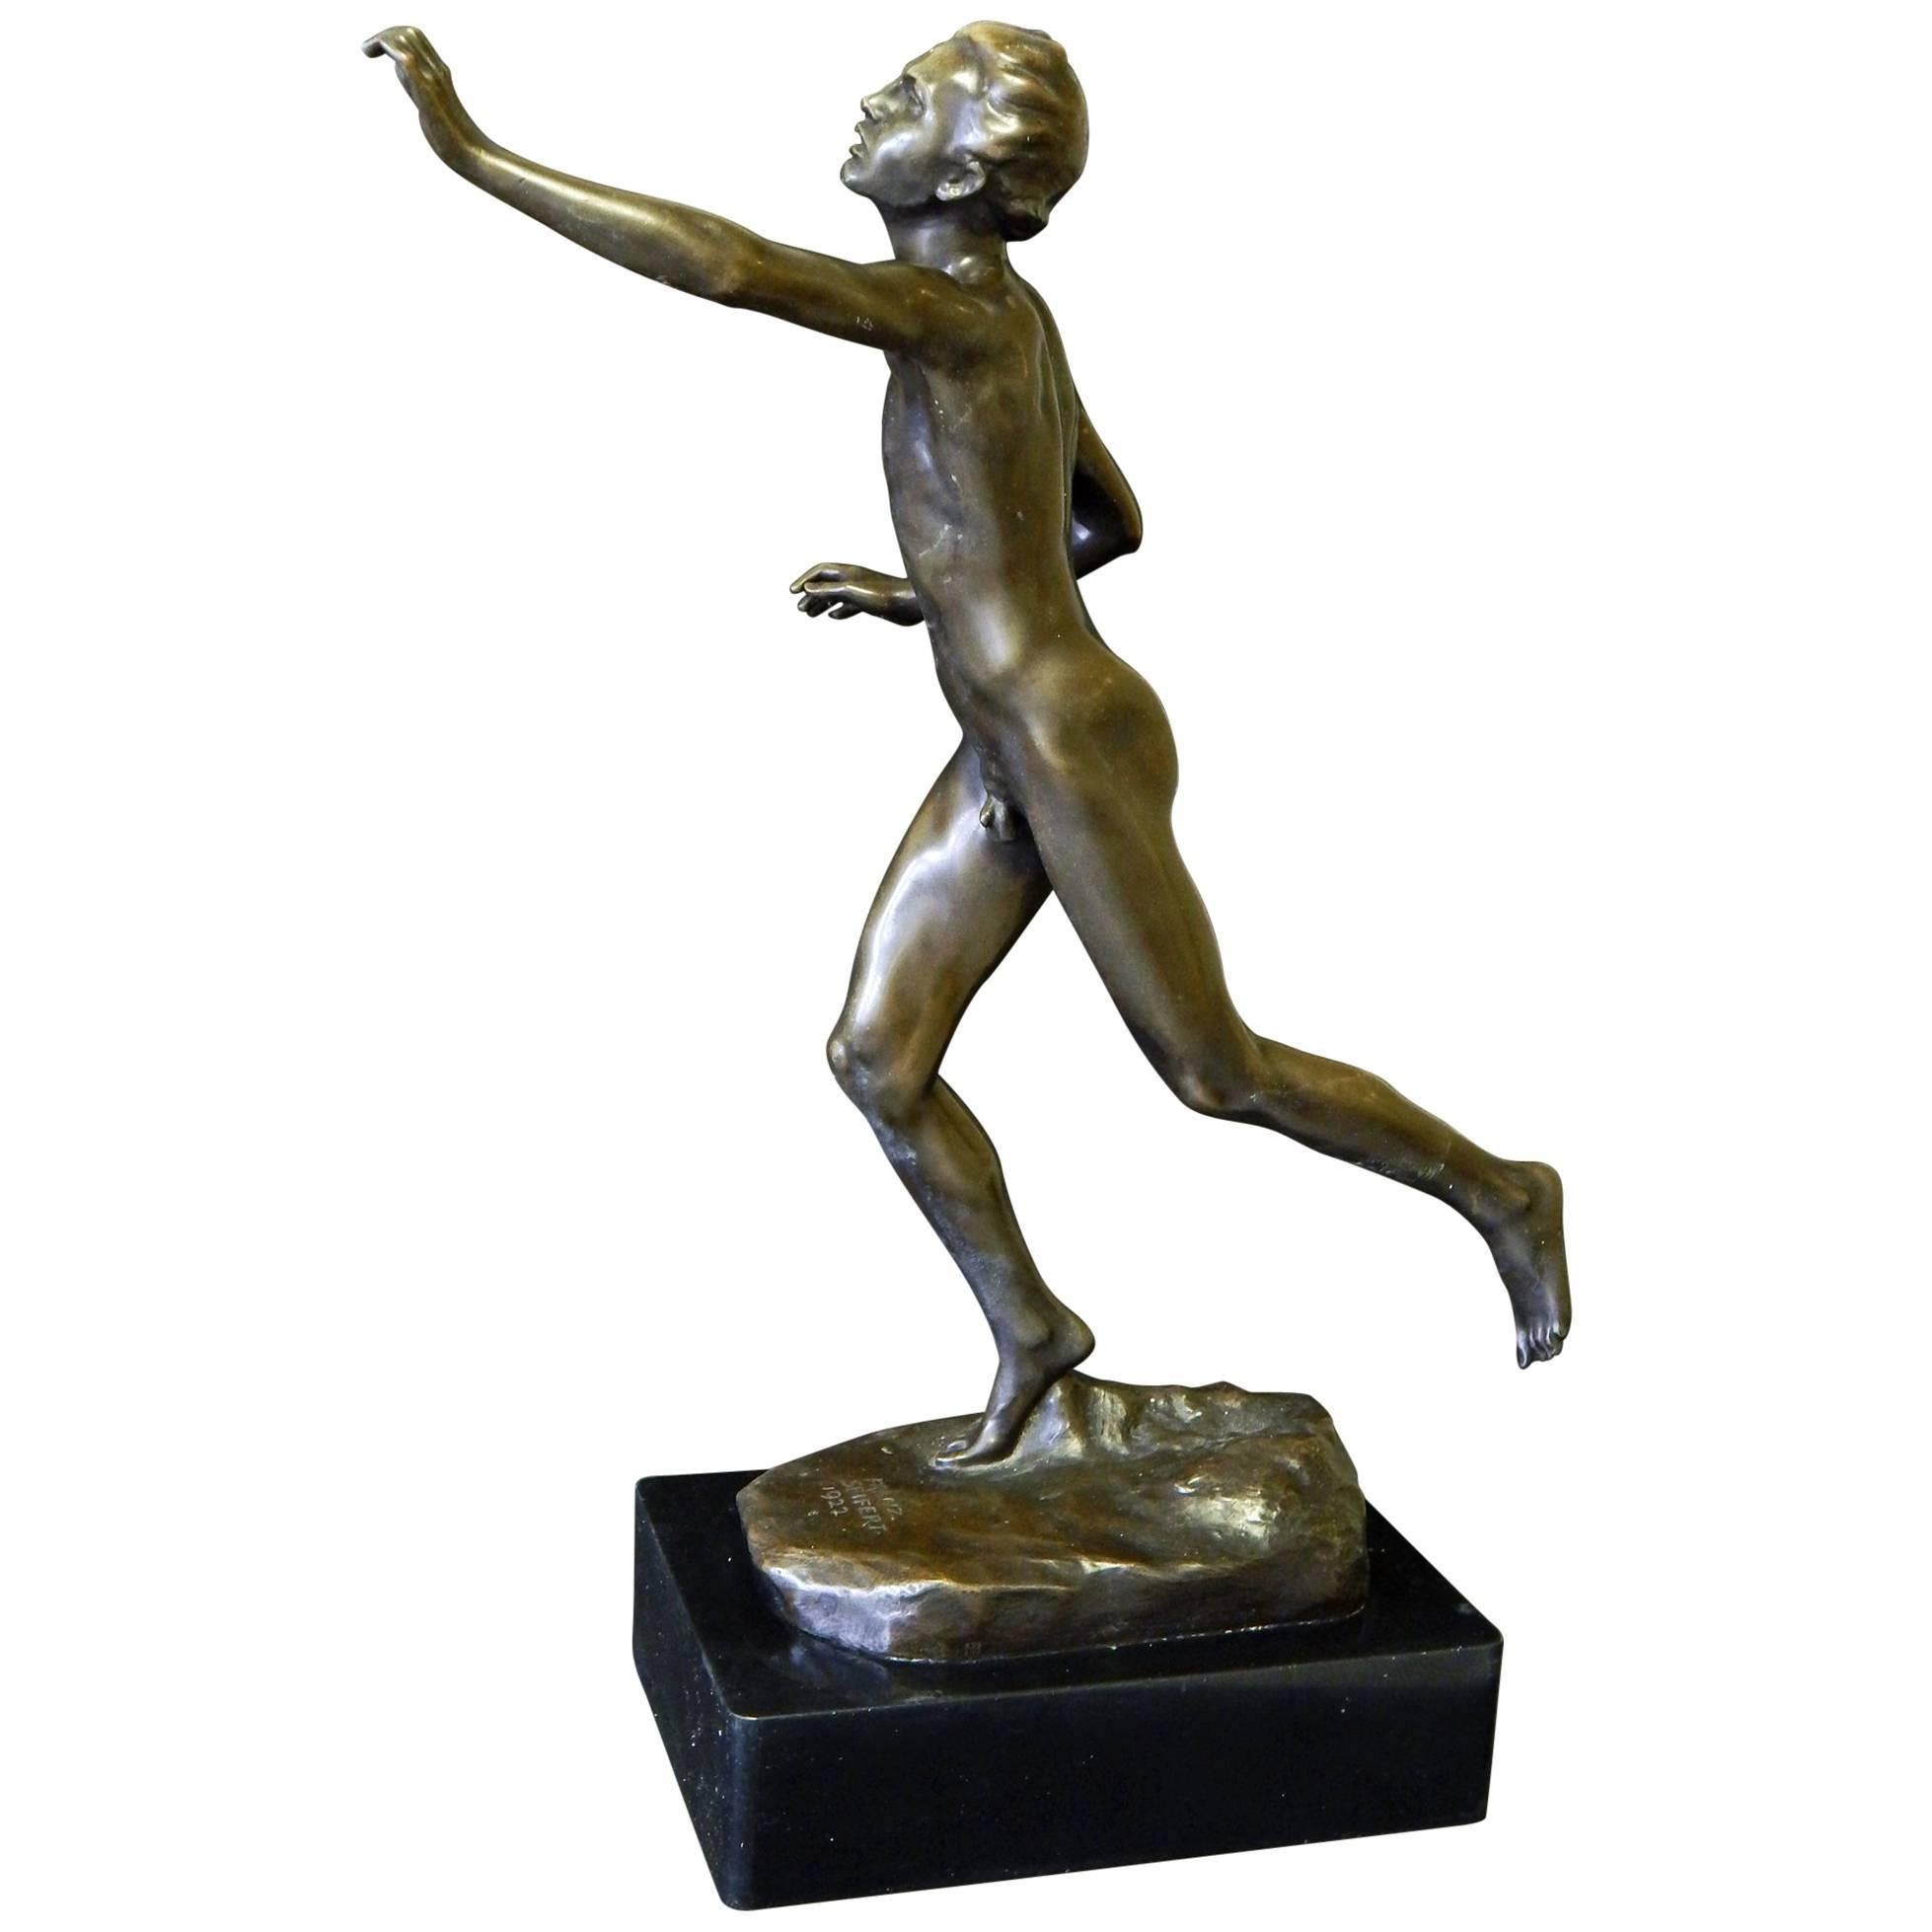 "Runner, " Large Rare Bronze of Nude Male Figure by Seifert, 1922 For Sale